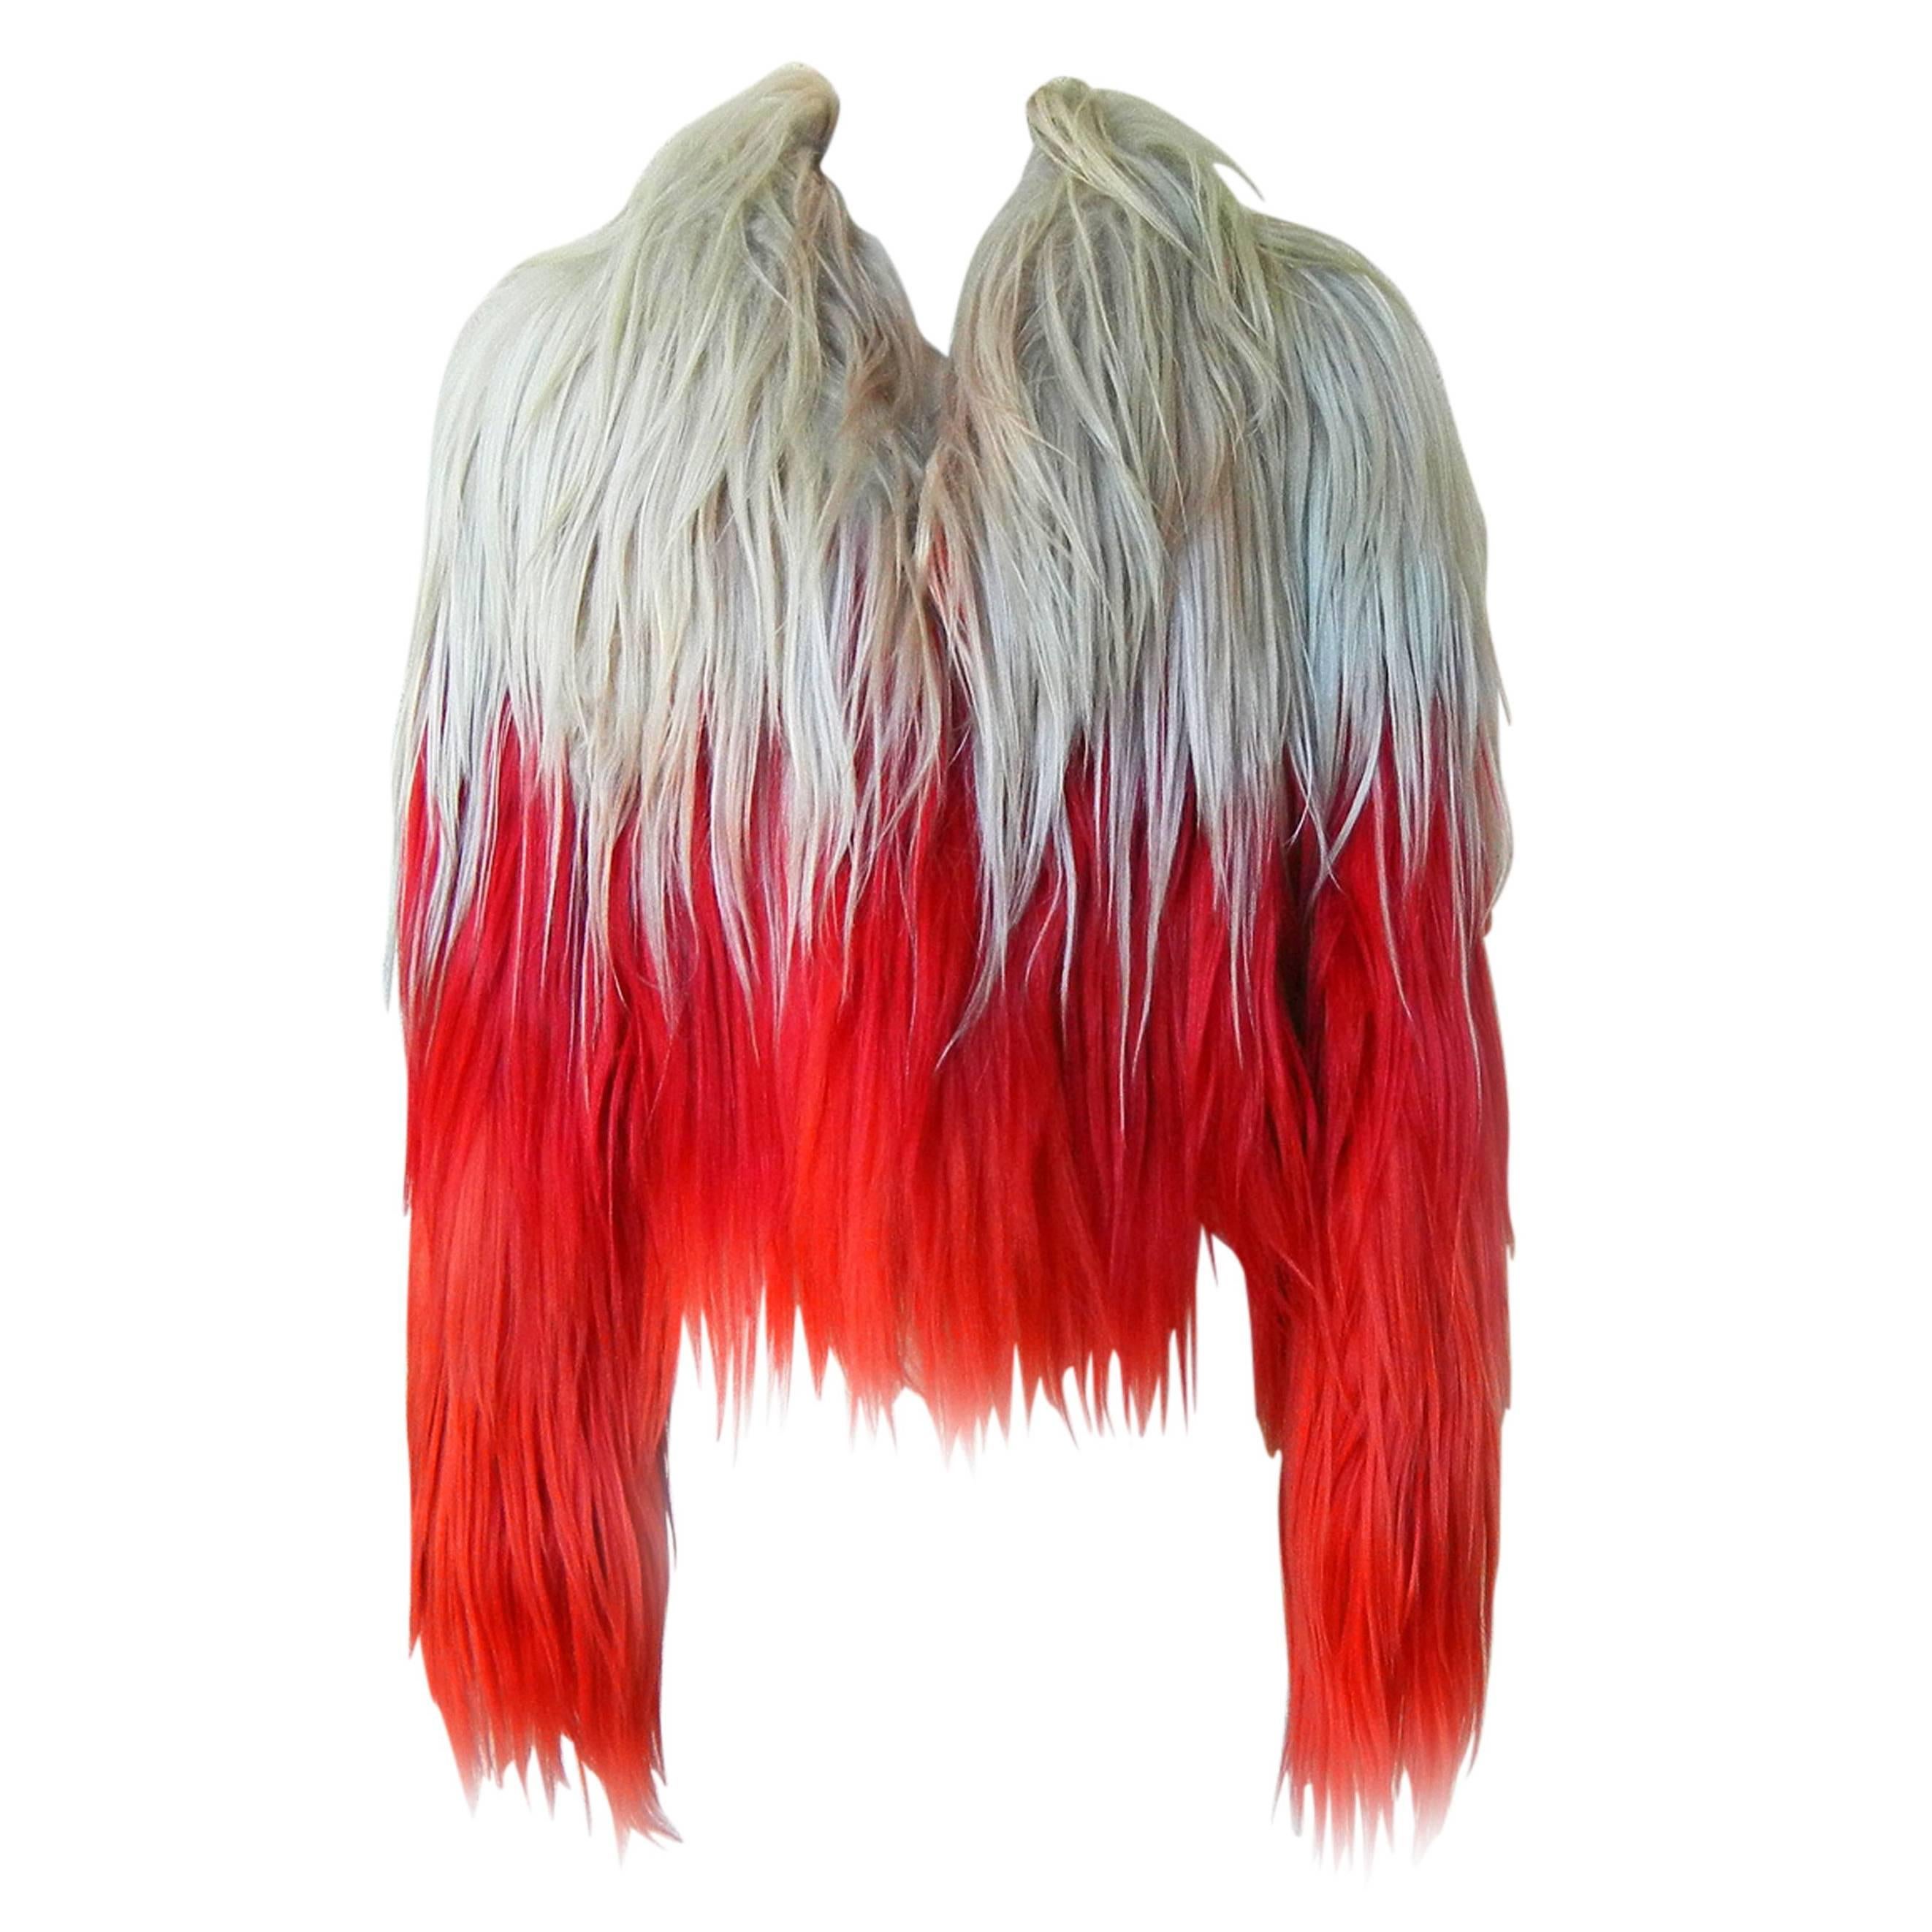 NWT $18K Tom Ford Ad Campaign Bergdorf Red Ombre Fur Store Sellout Jacket